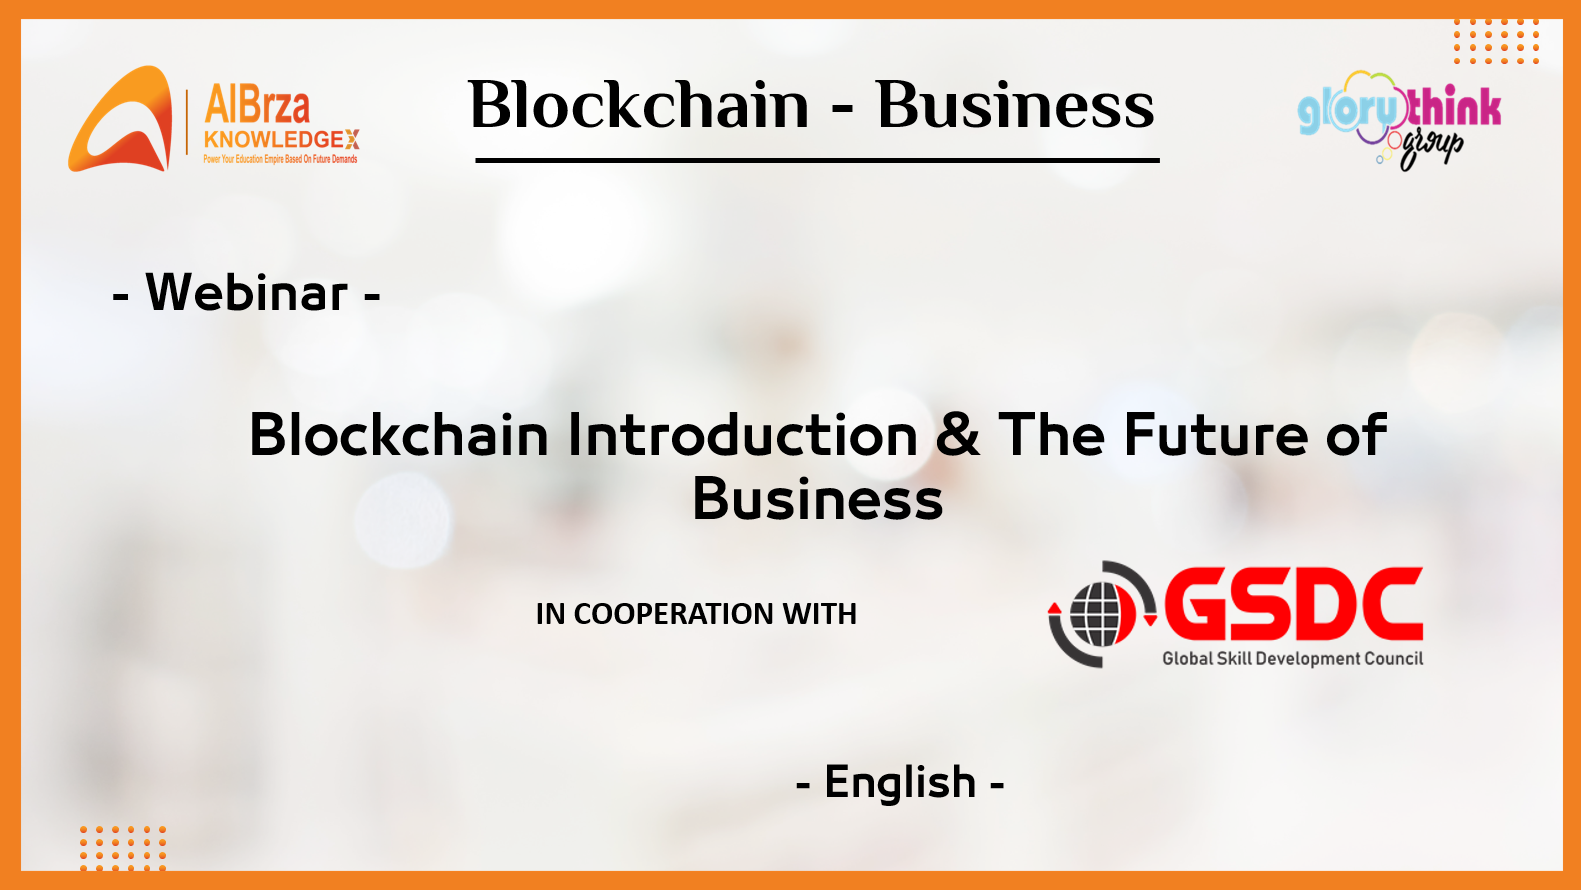 Blockchain Introduction & The Future of Business